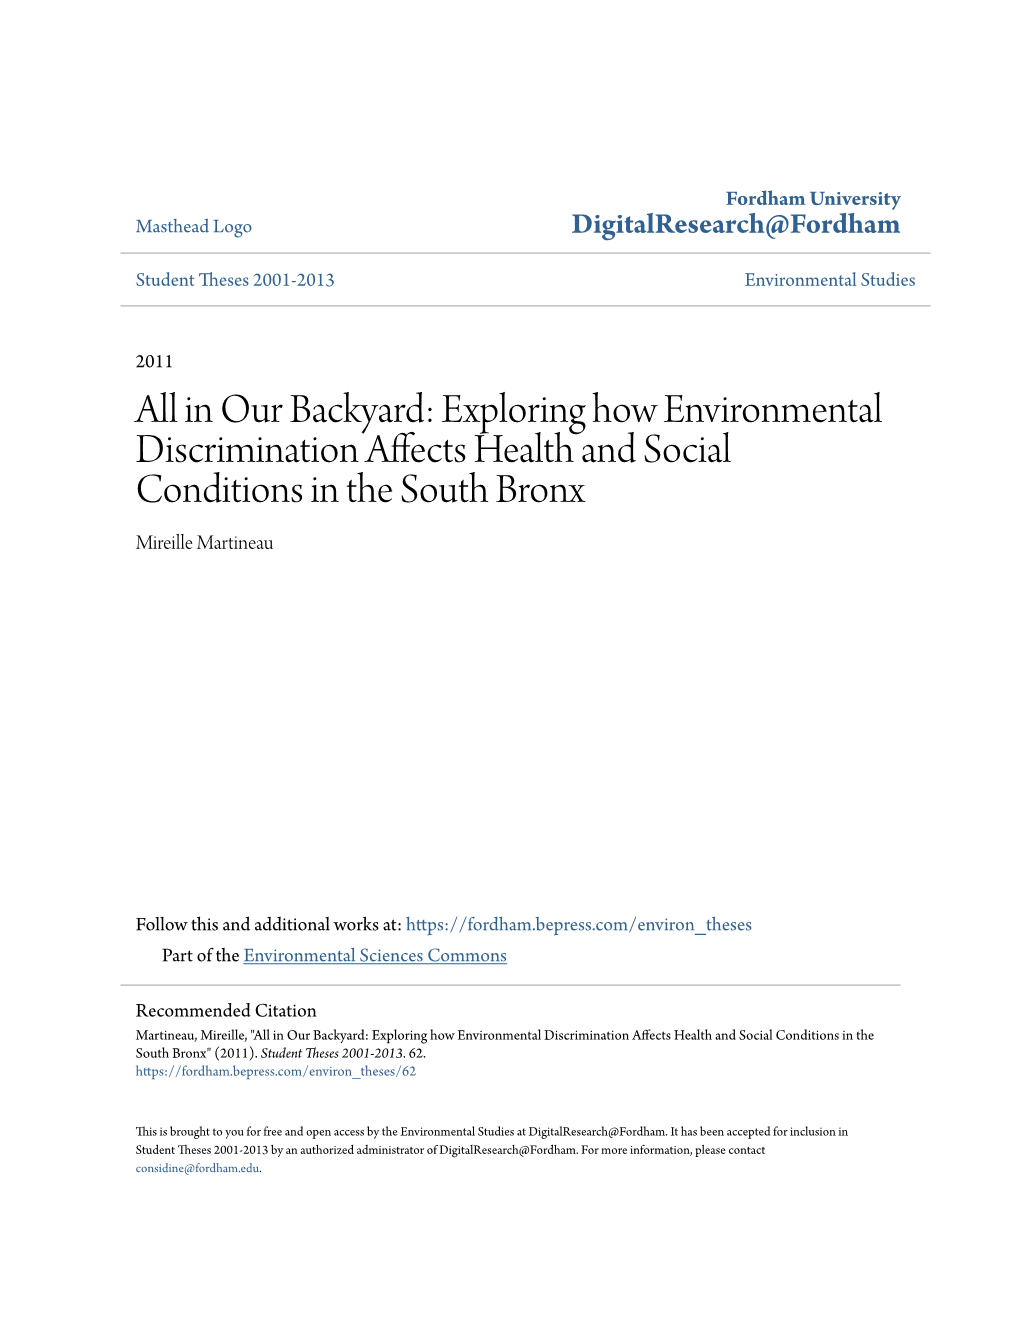 Exploring How Environmental Discrimination Affects Health and Social Conditions in the South Bronx Mireille Martineau